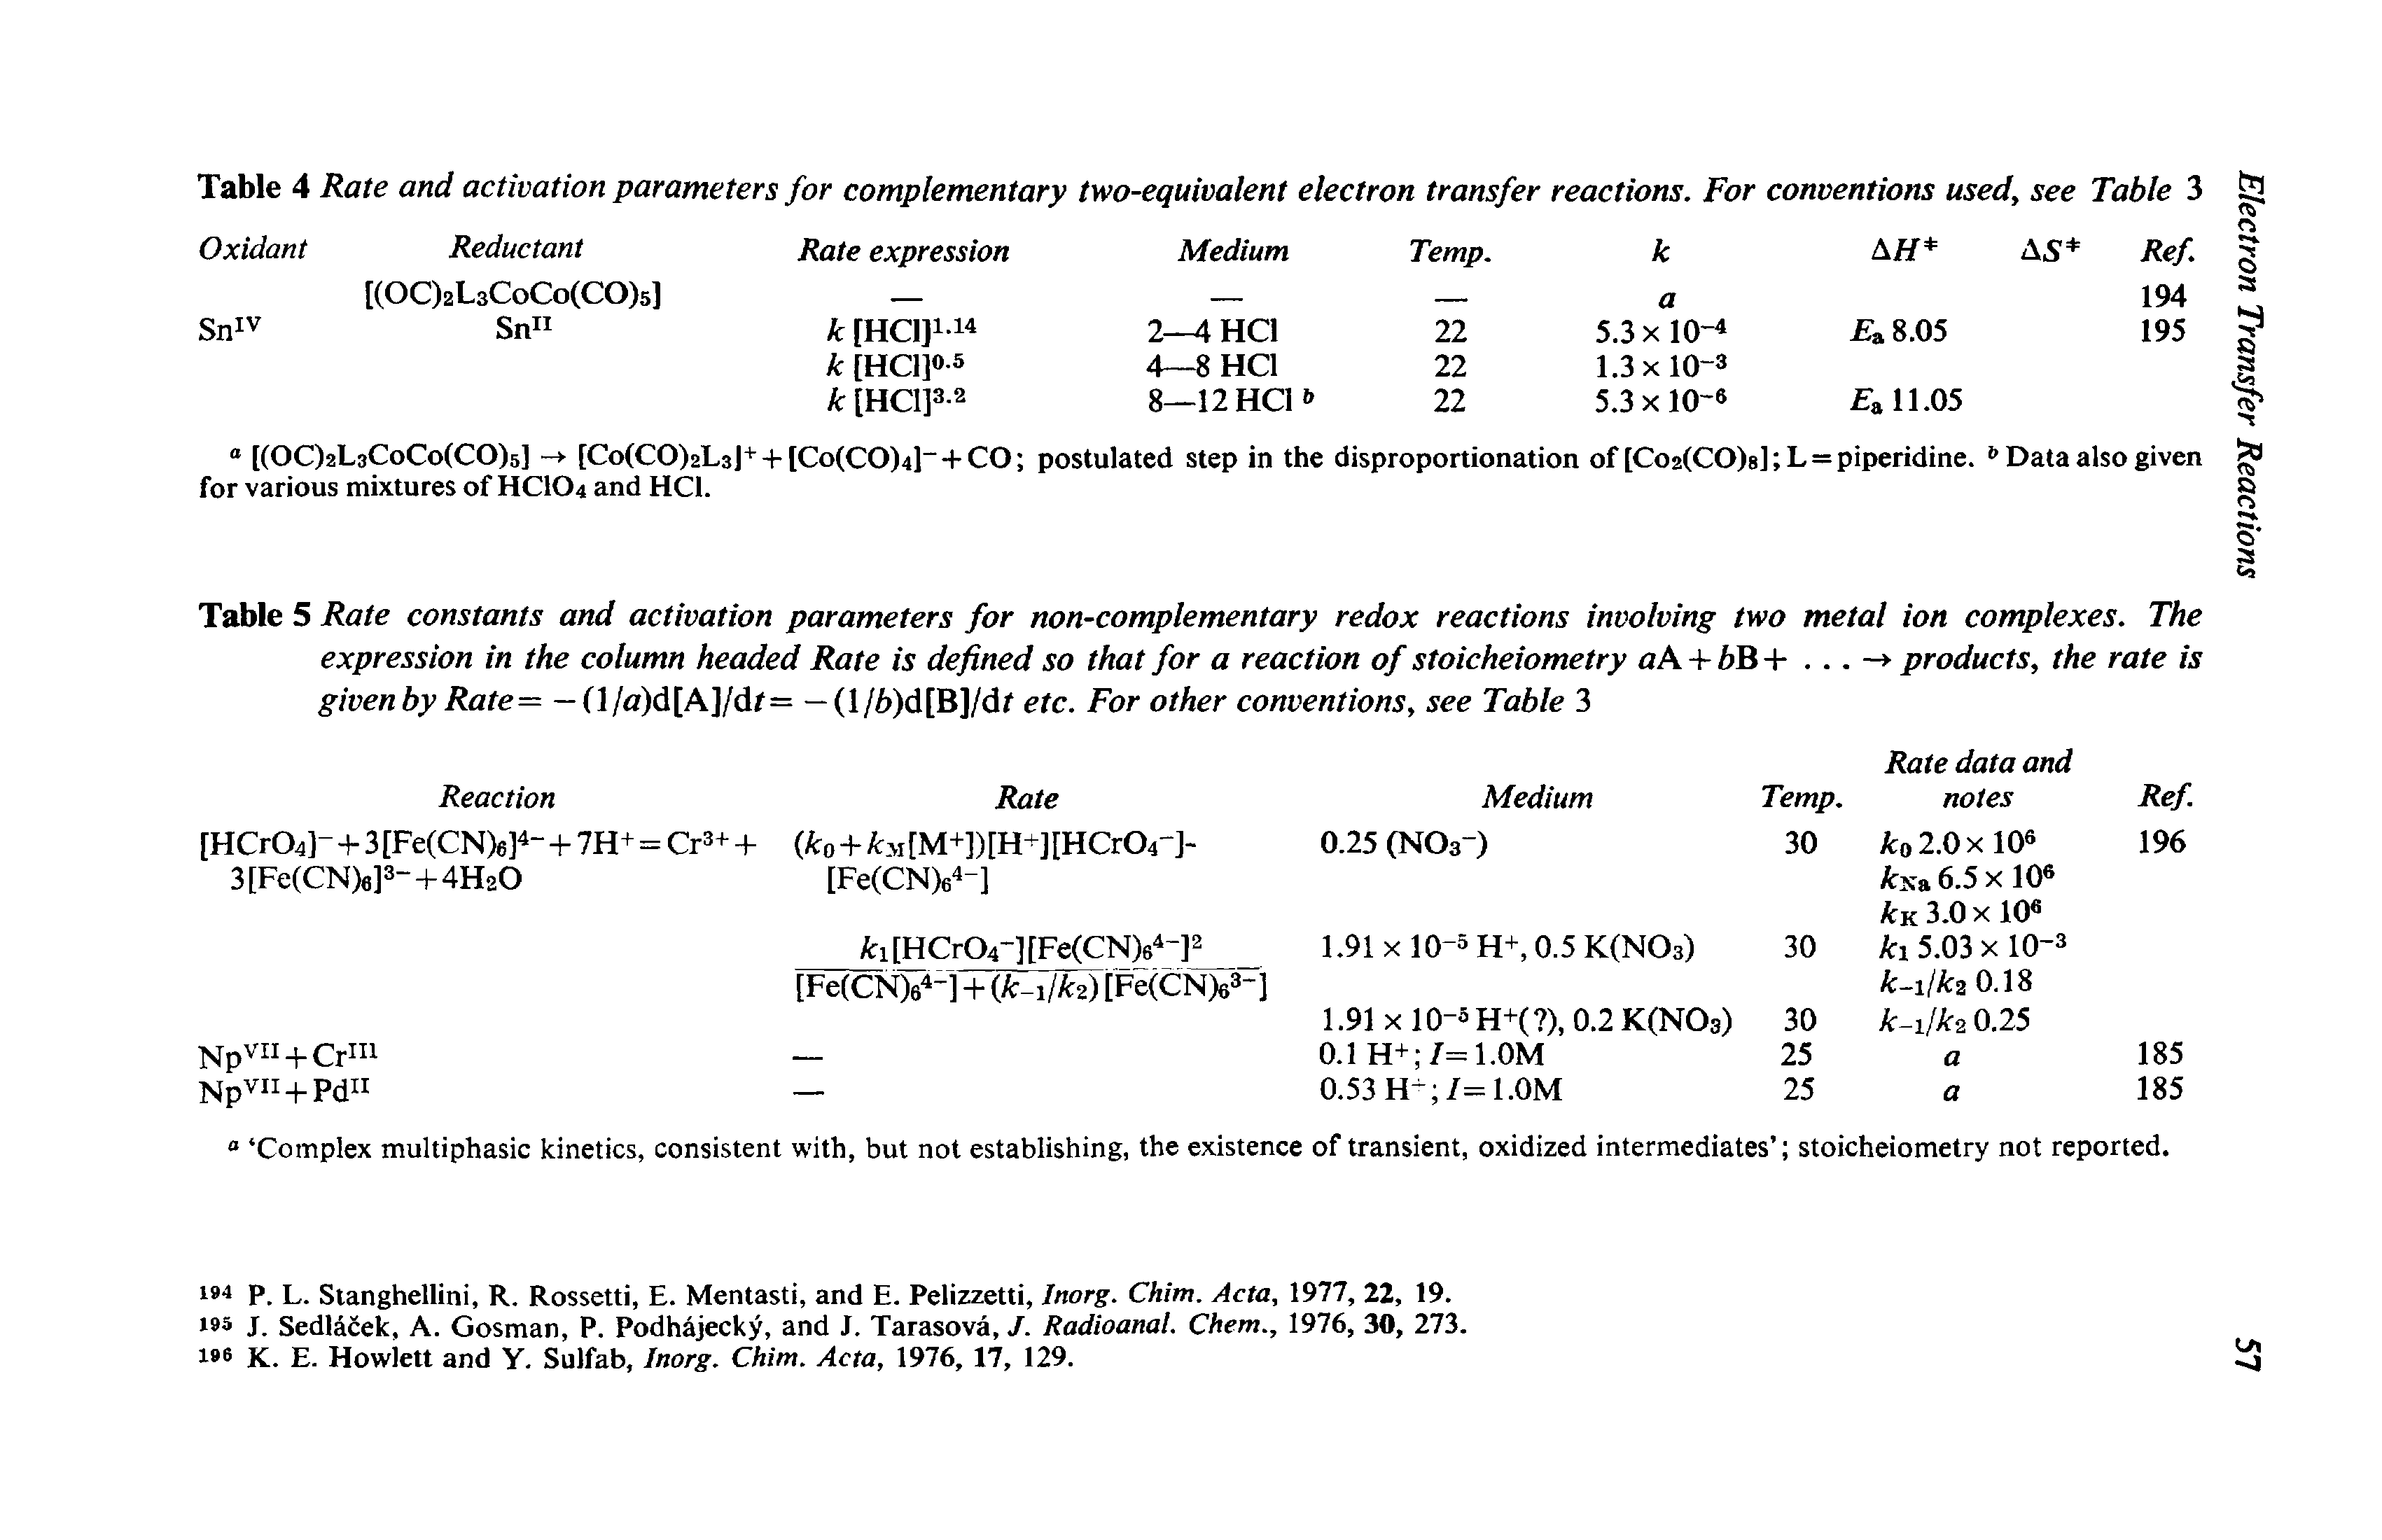 Table 5 Rate constants and activation parameters for non-complementary redox reactions involving two metal ion complexes. The expression in the column headed Rate is defined so that for a reaction of stoicheiometry aA + bB+. .. products, the rate is given by Rate = — (l/a)d[A]/df= — (l/6)d[B]/df etc. For other conventions, see Table 3...